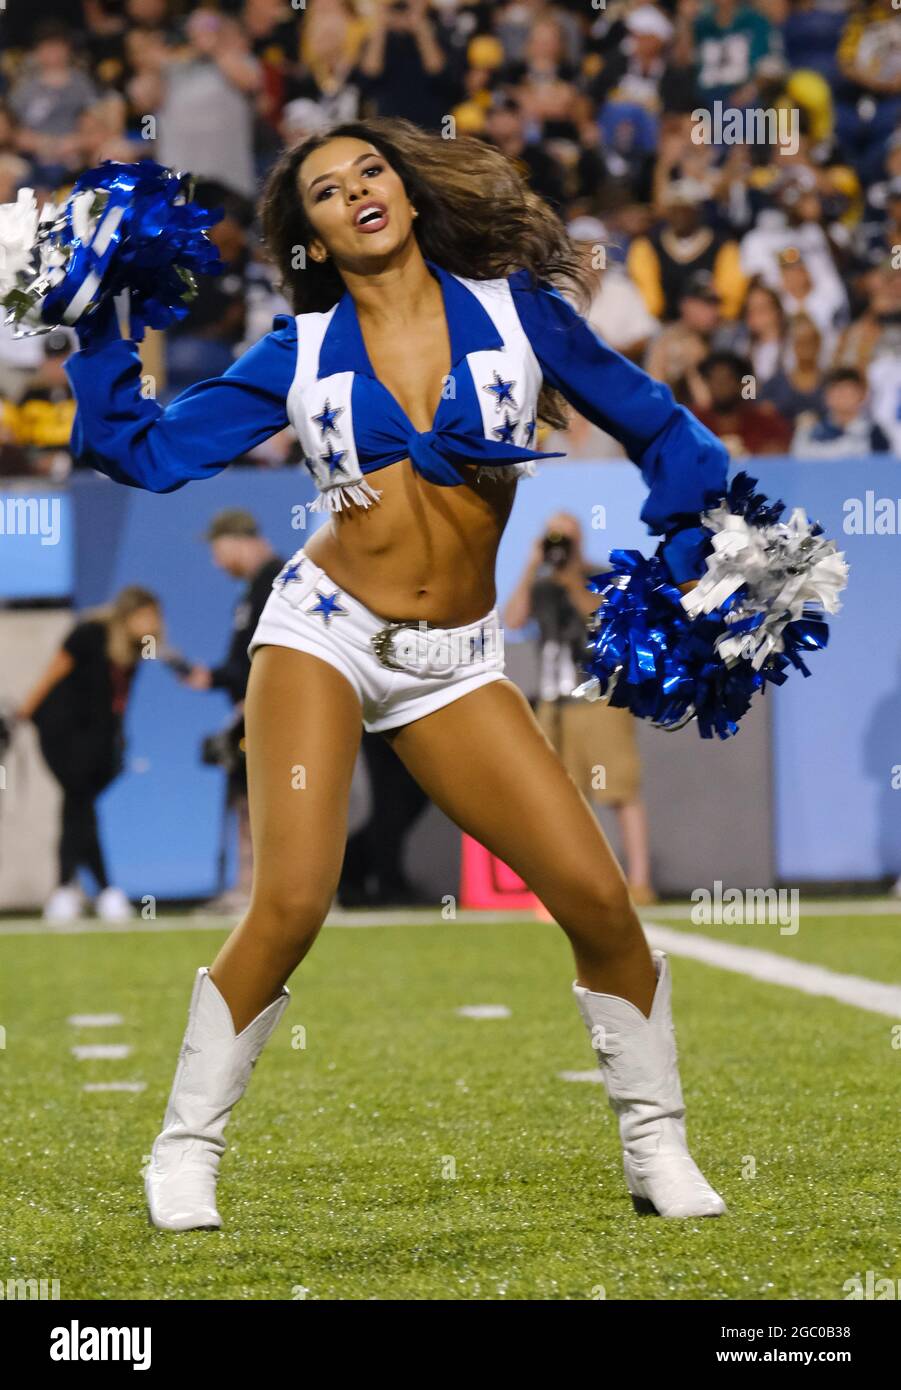 August 5th, 2021: Dallas Cowboys Cheerleader(s) during the